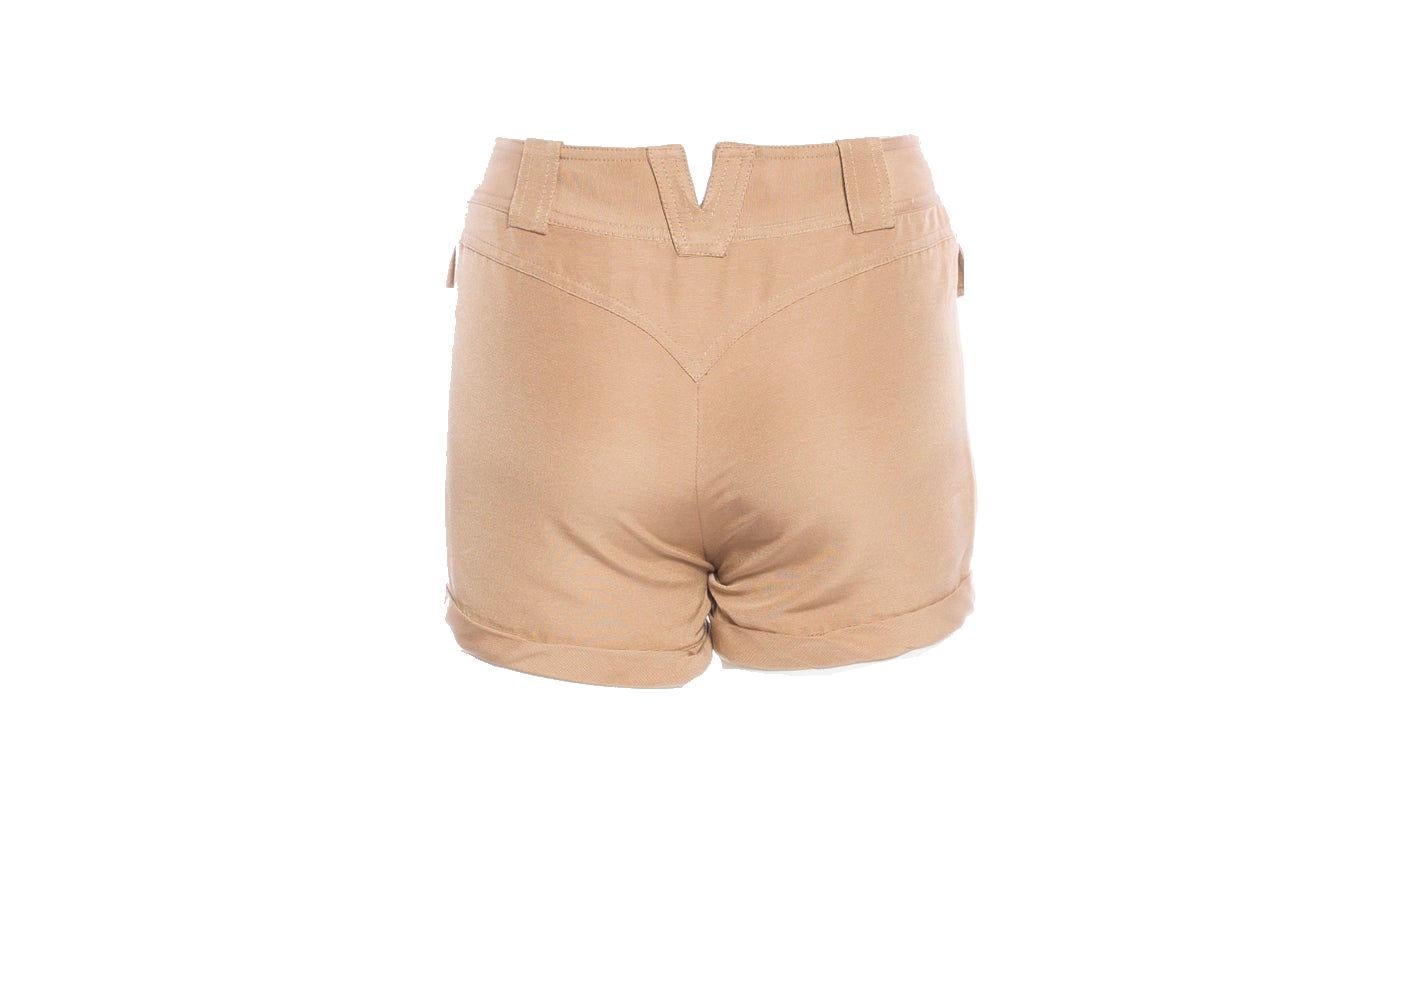 Hot pants shorts in beige cotton
V detail on back 
Buttons with Versace signature Medusa detail
Cotton-Silk Mix
Made in Italy
Dry Clean Only
Fabric: 68% Cotton, 32% Silk
Size 38


Please see runway pictures for style reference

